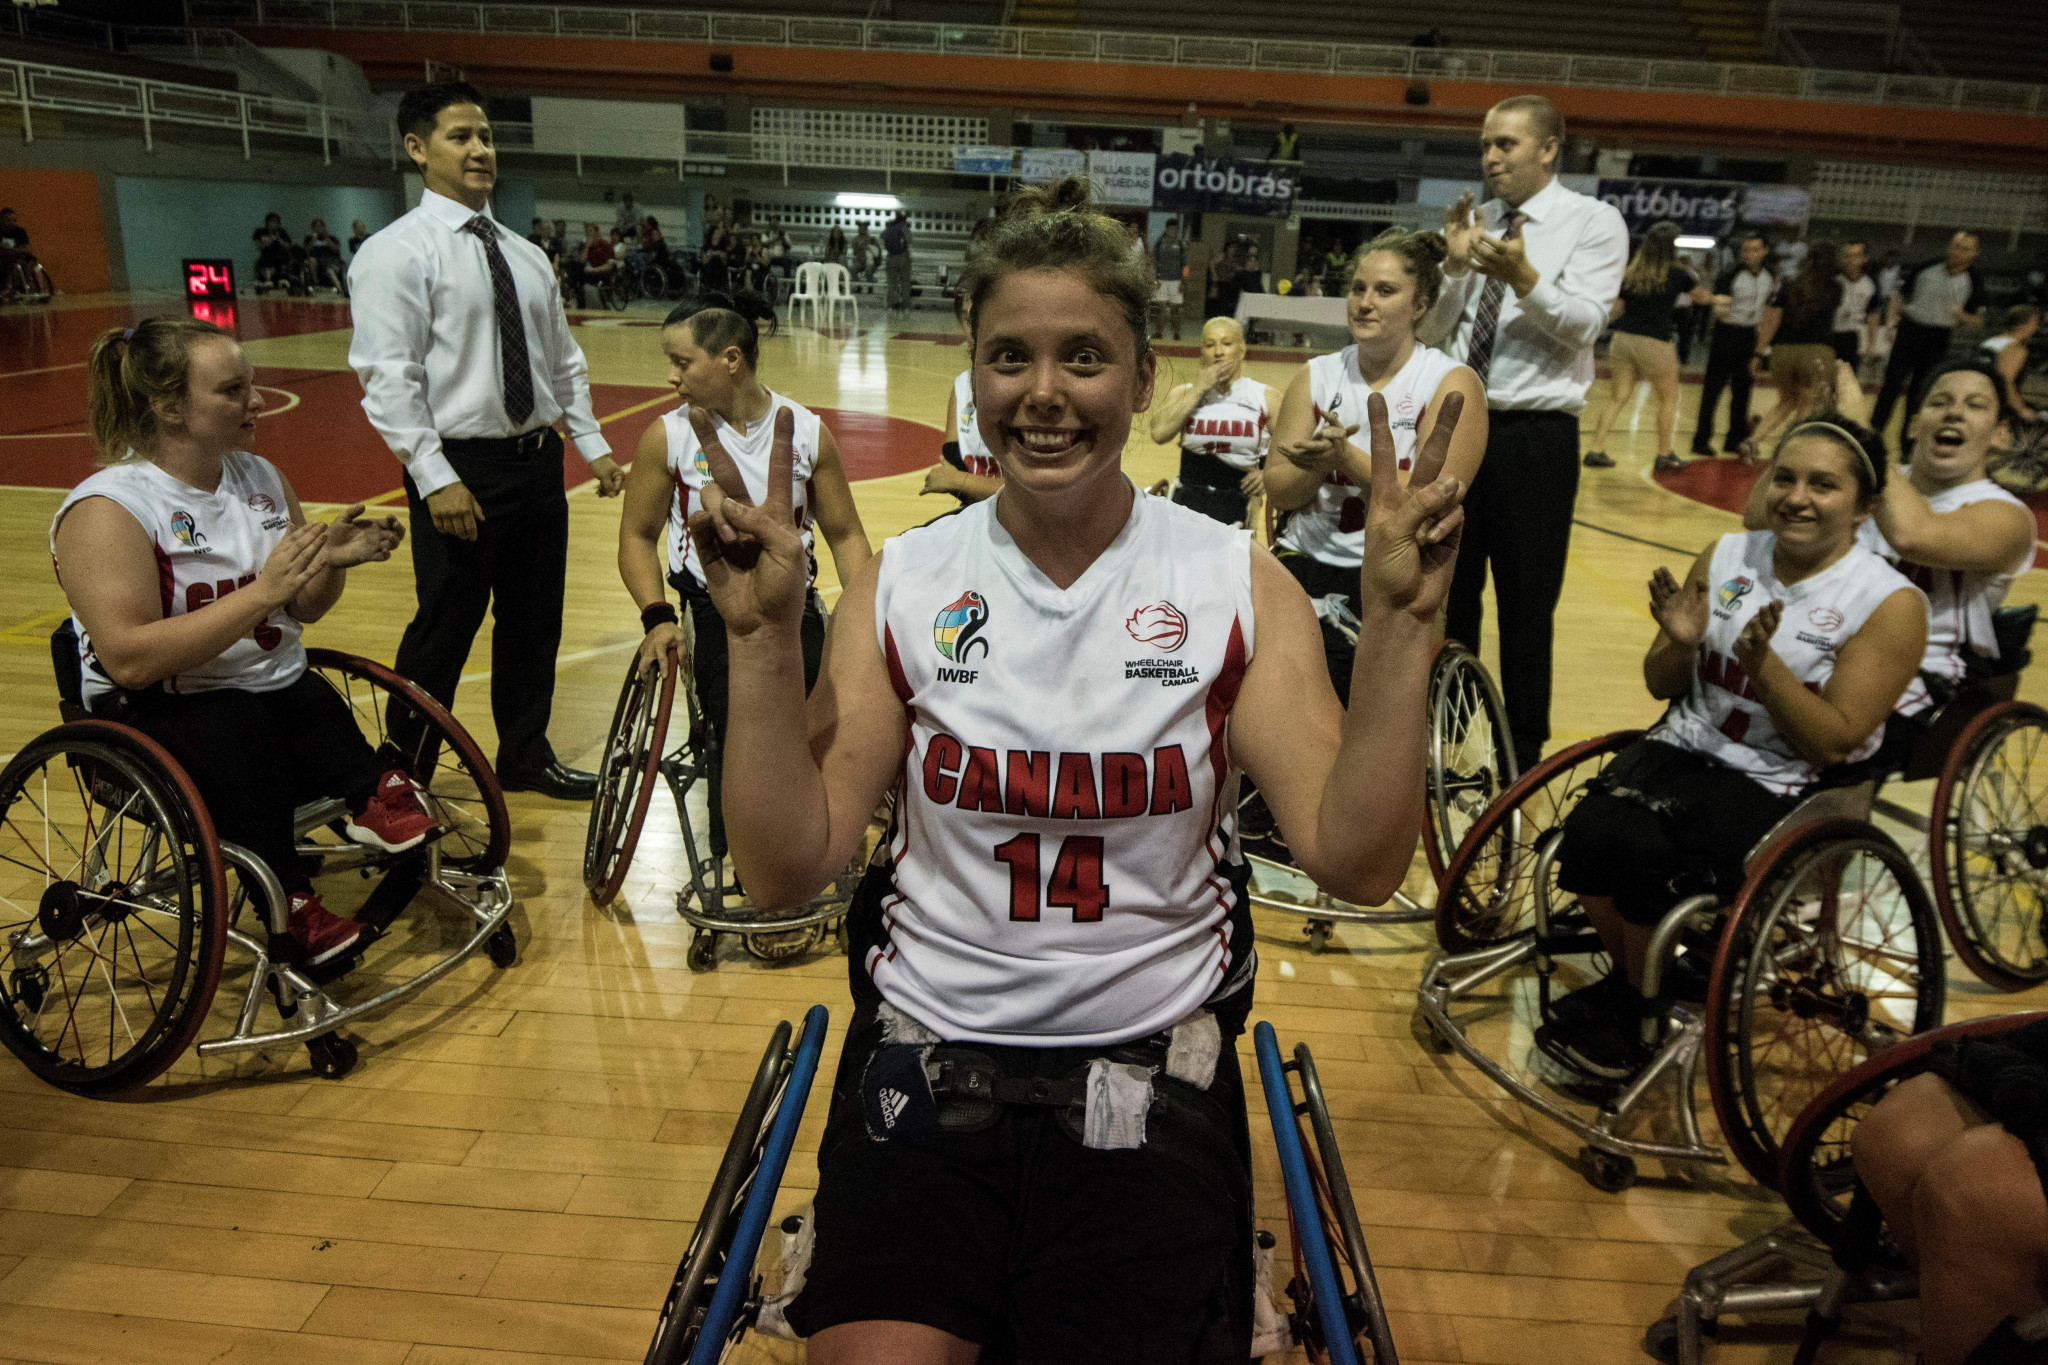 Gavel aiming to bring "a diverse perspective" to IWBF Athlete Steering Committee